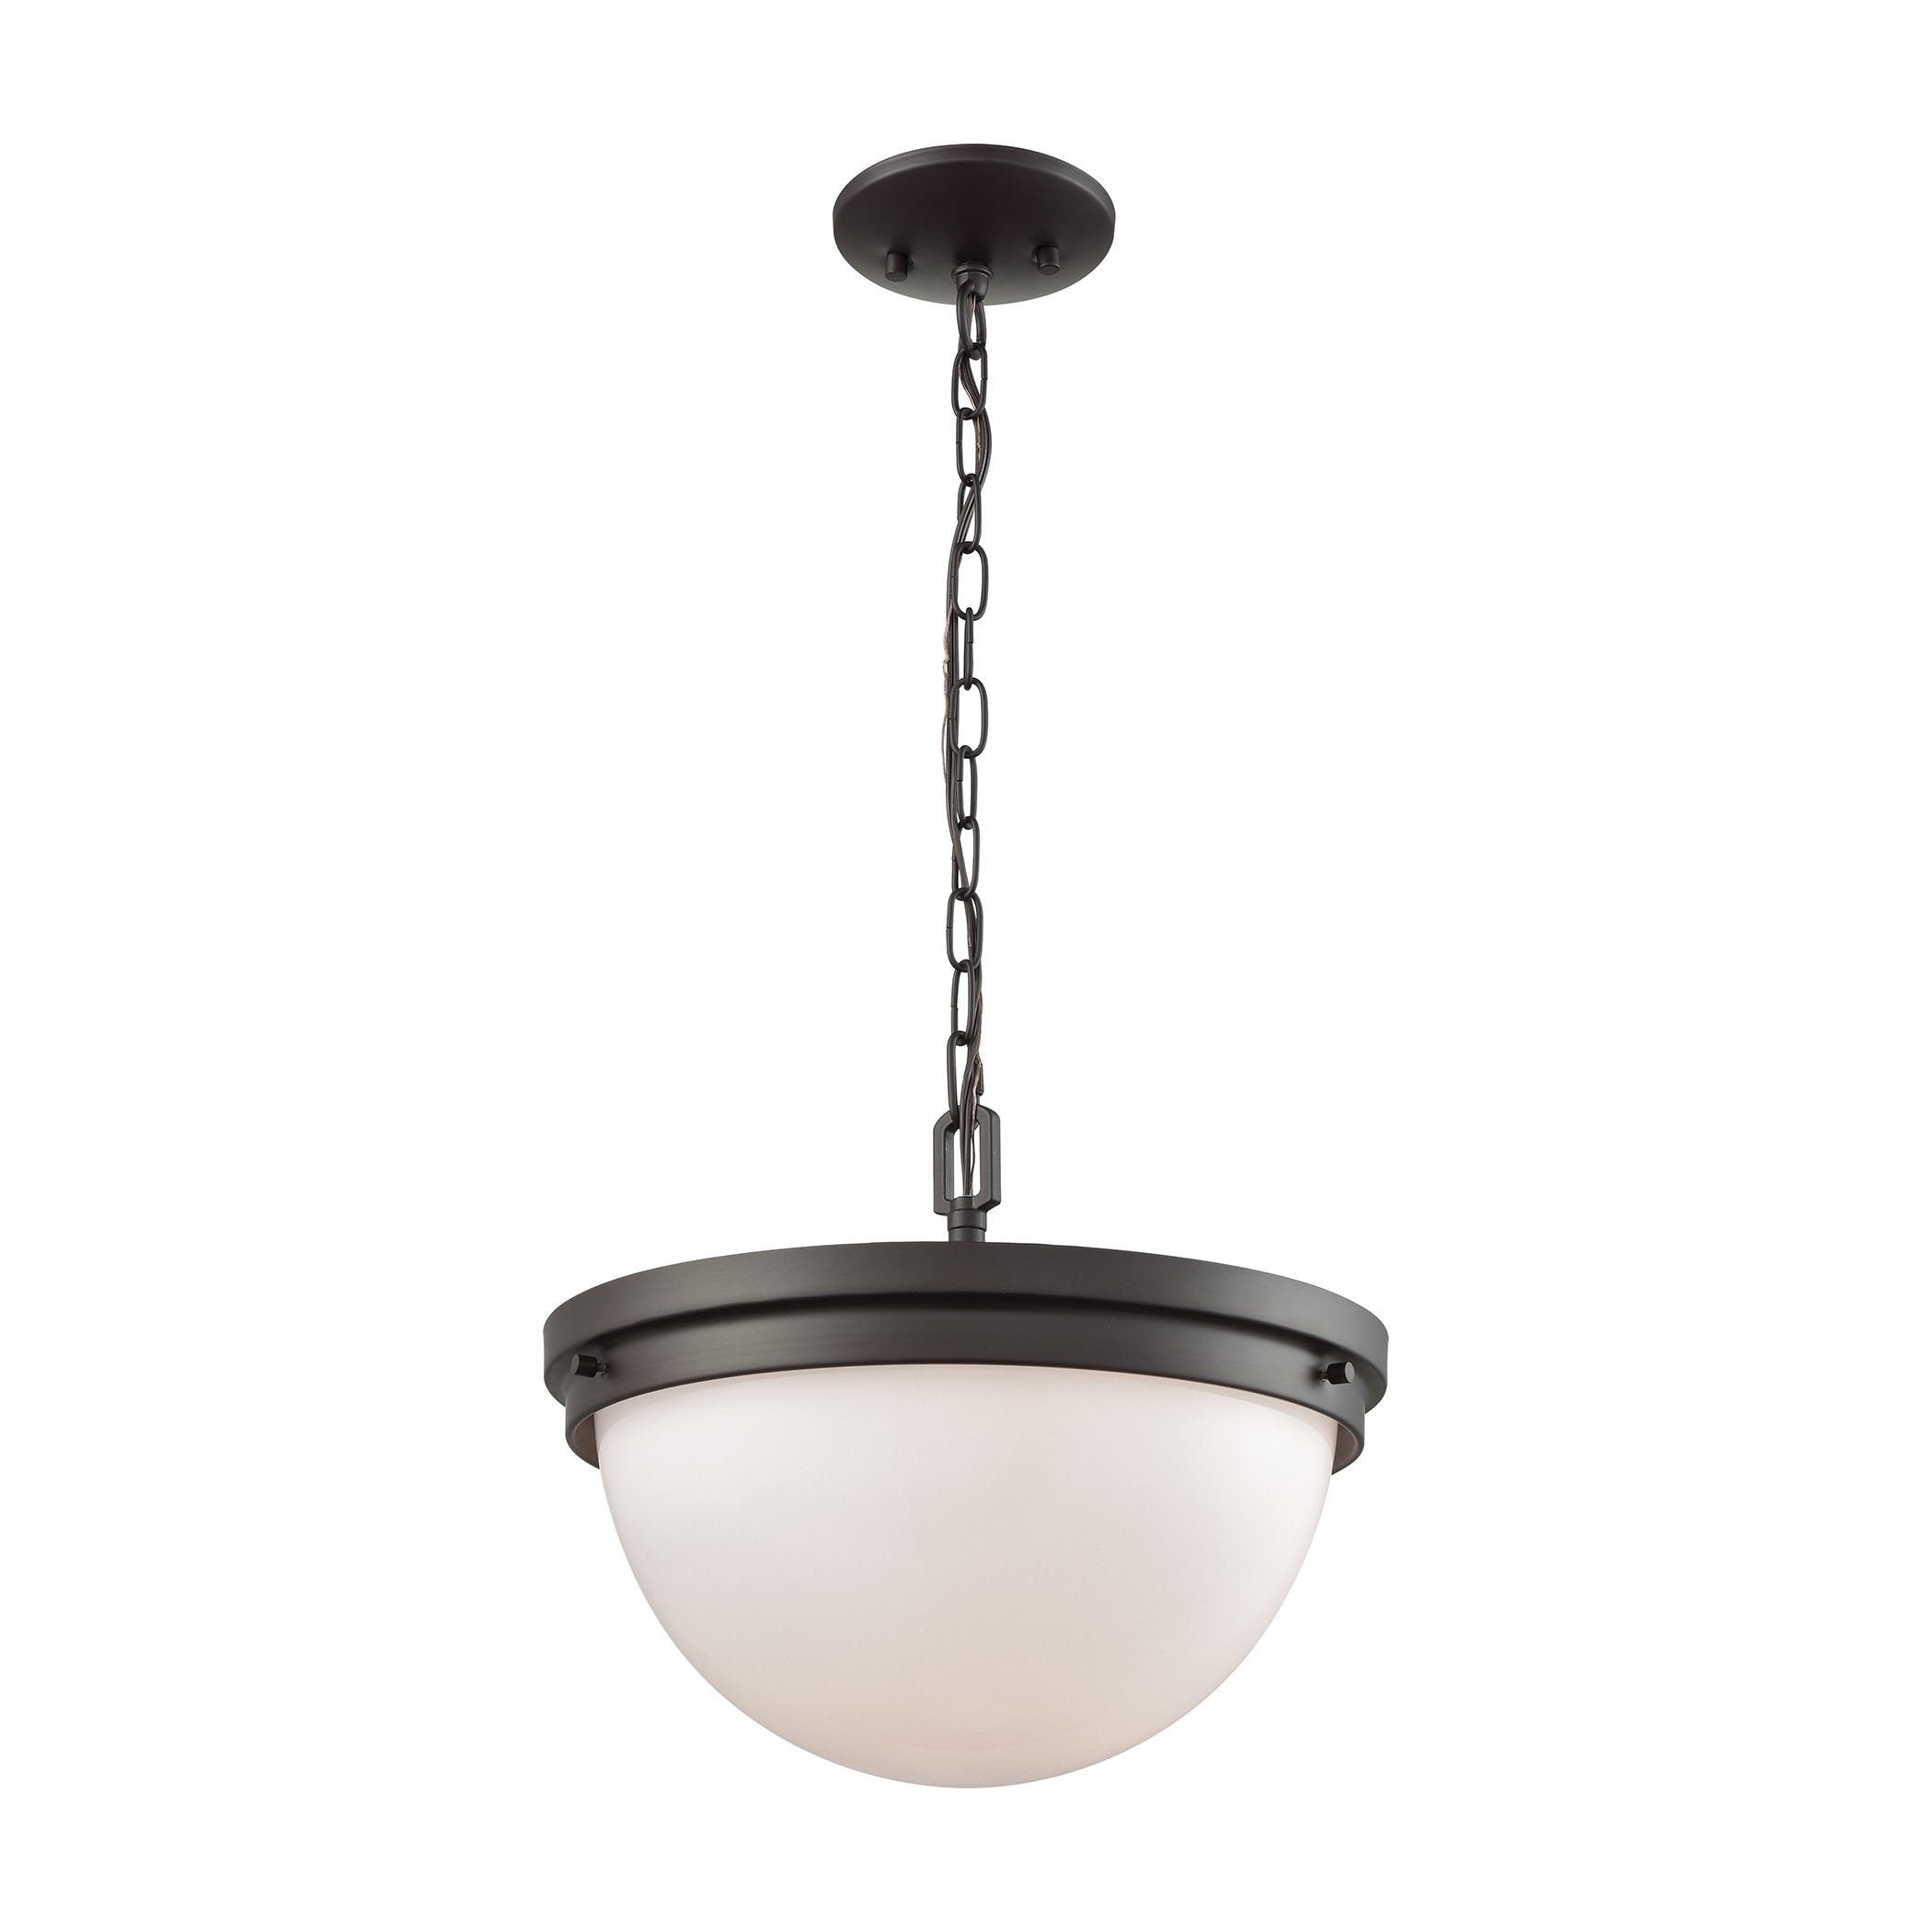 Beckett 3-Light Pendant, Semi Flush Mount Dual Mount in Oil Rubbed Bronze with Opal White Glass Ceiling Thomas Lighting 